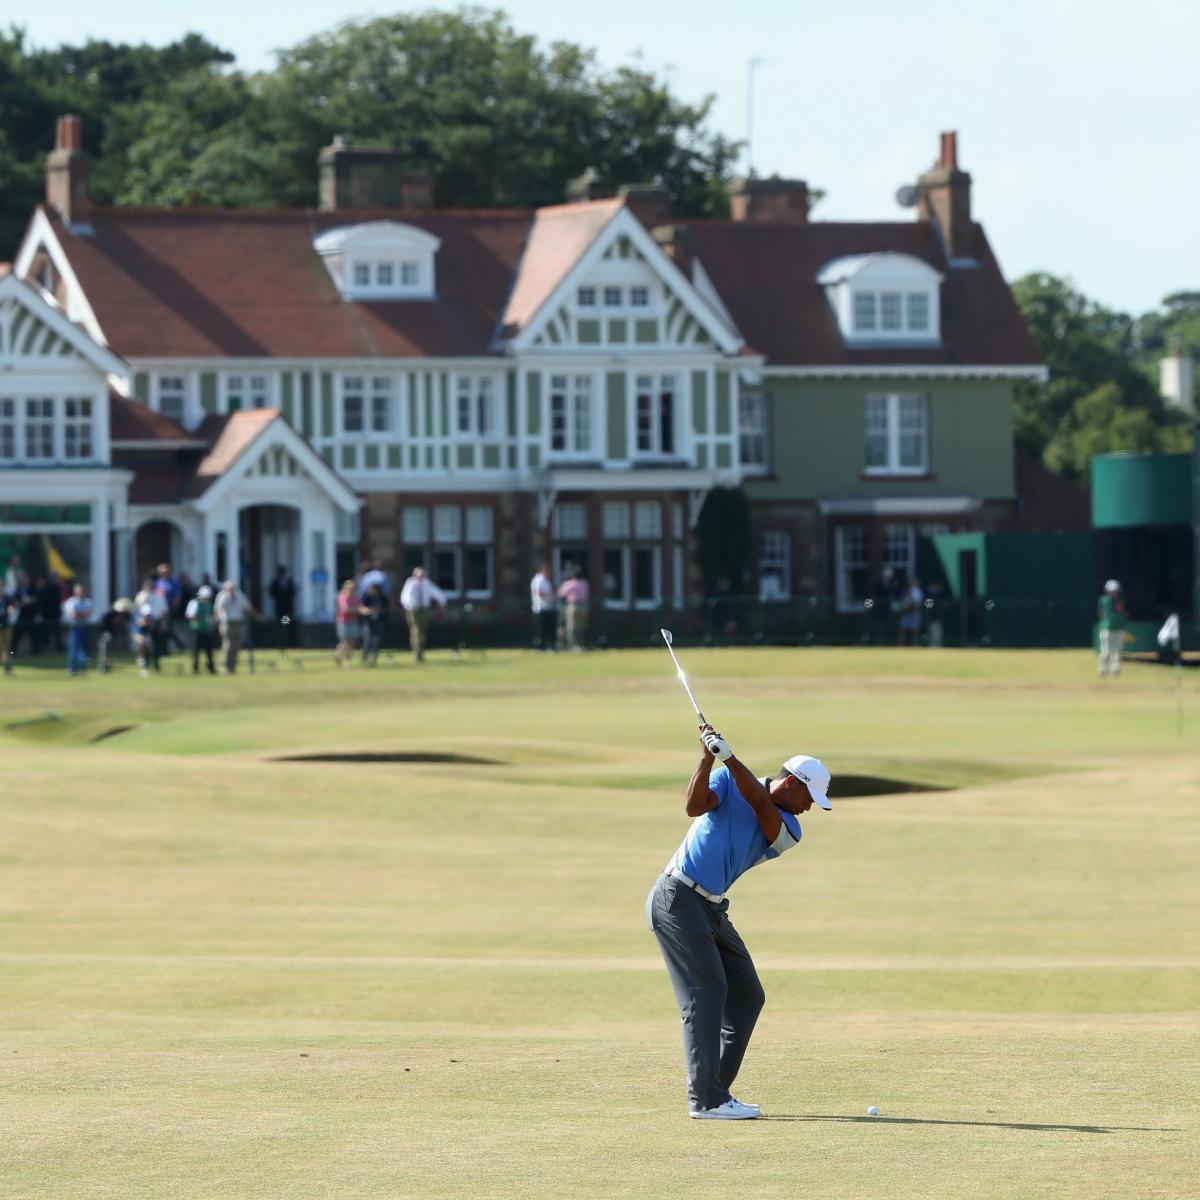 British Open 2013: Complete TV and Live Stream Guide for Opening Round